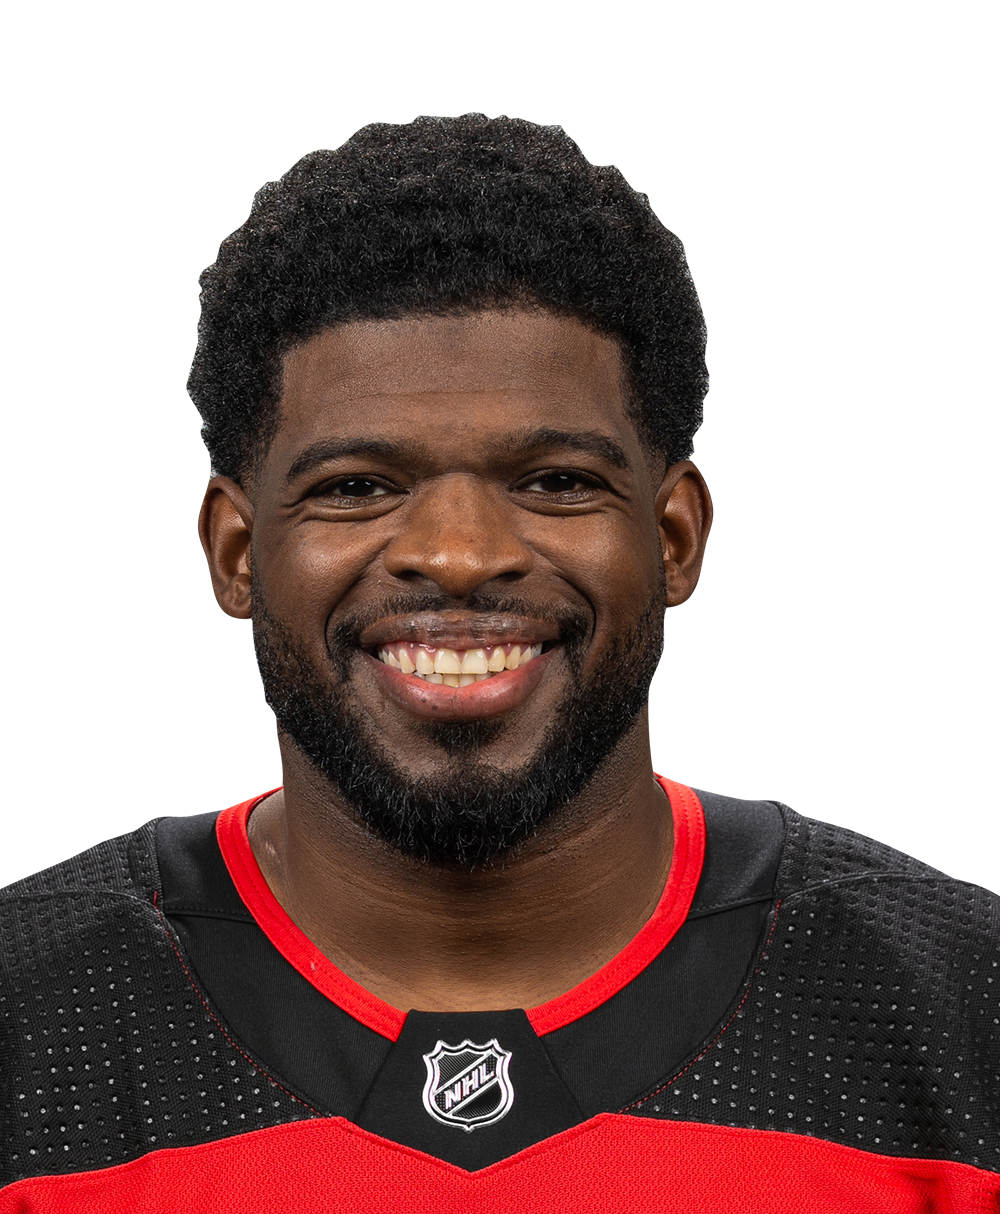 What's next for P.K. Subban?